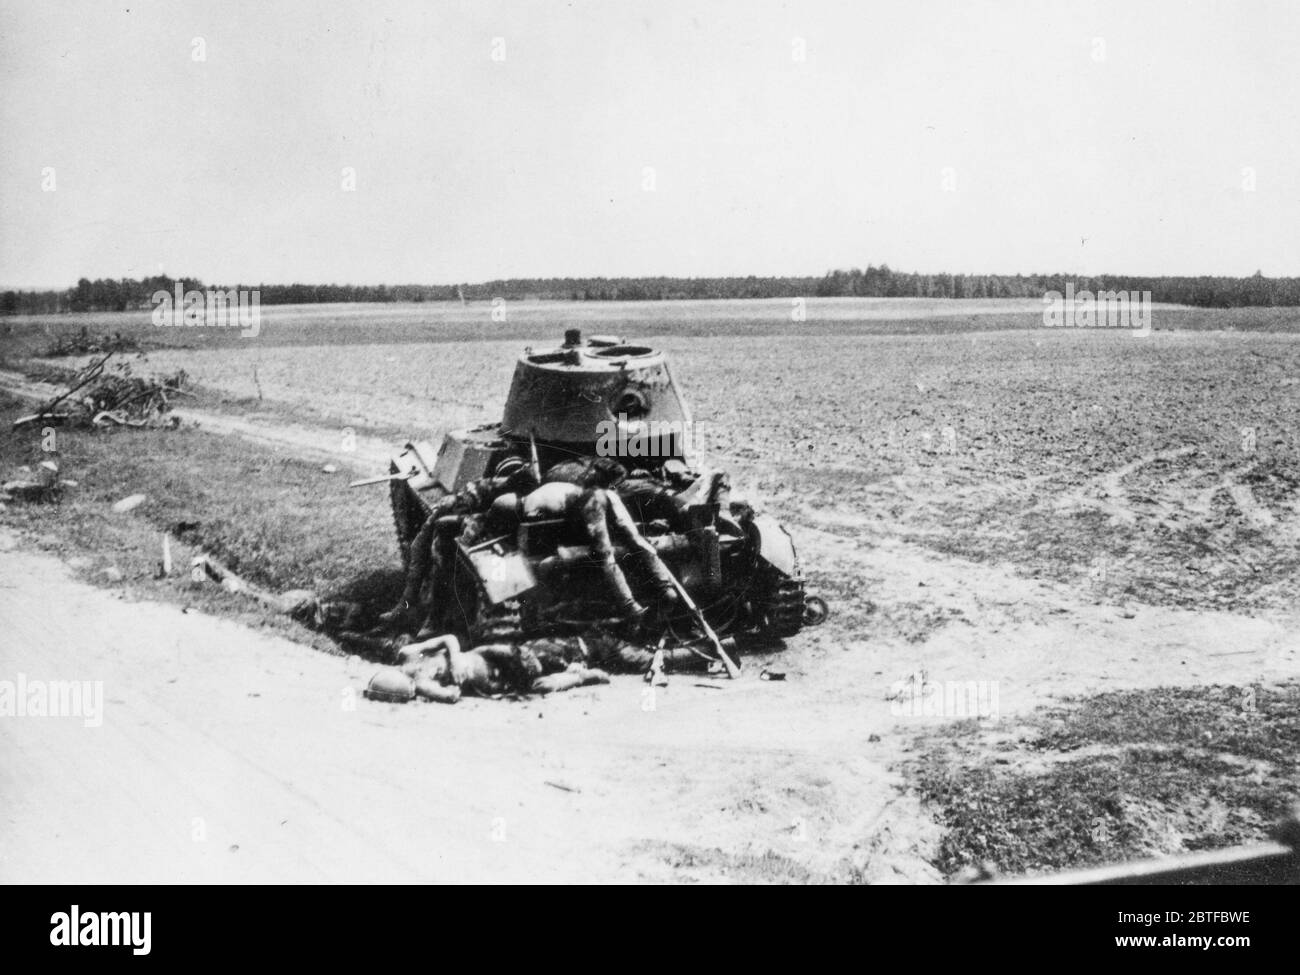 Destroyed Russian Tank Operation Barbarossa - German Invasion of Russia, 1941 - 15th Infantary Division of the Thuringia-Kurhessen Division Stock Photo